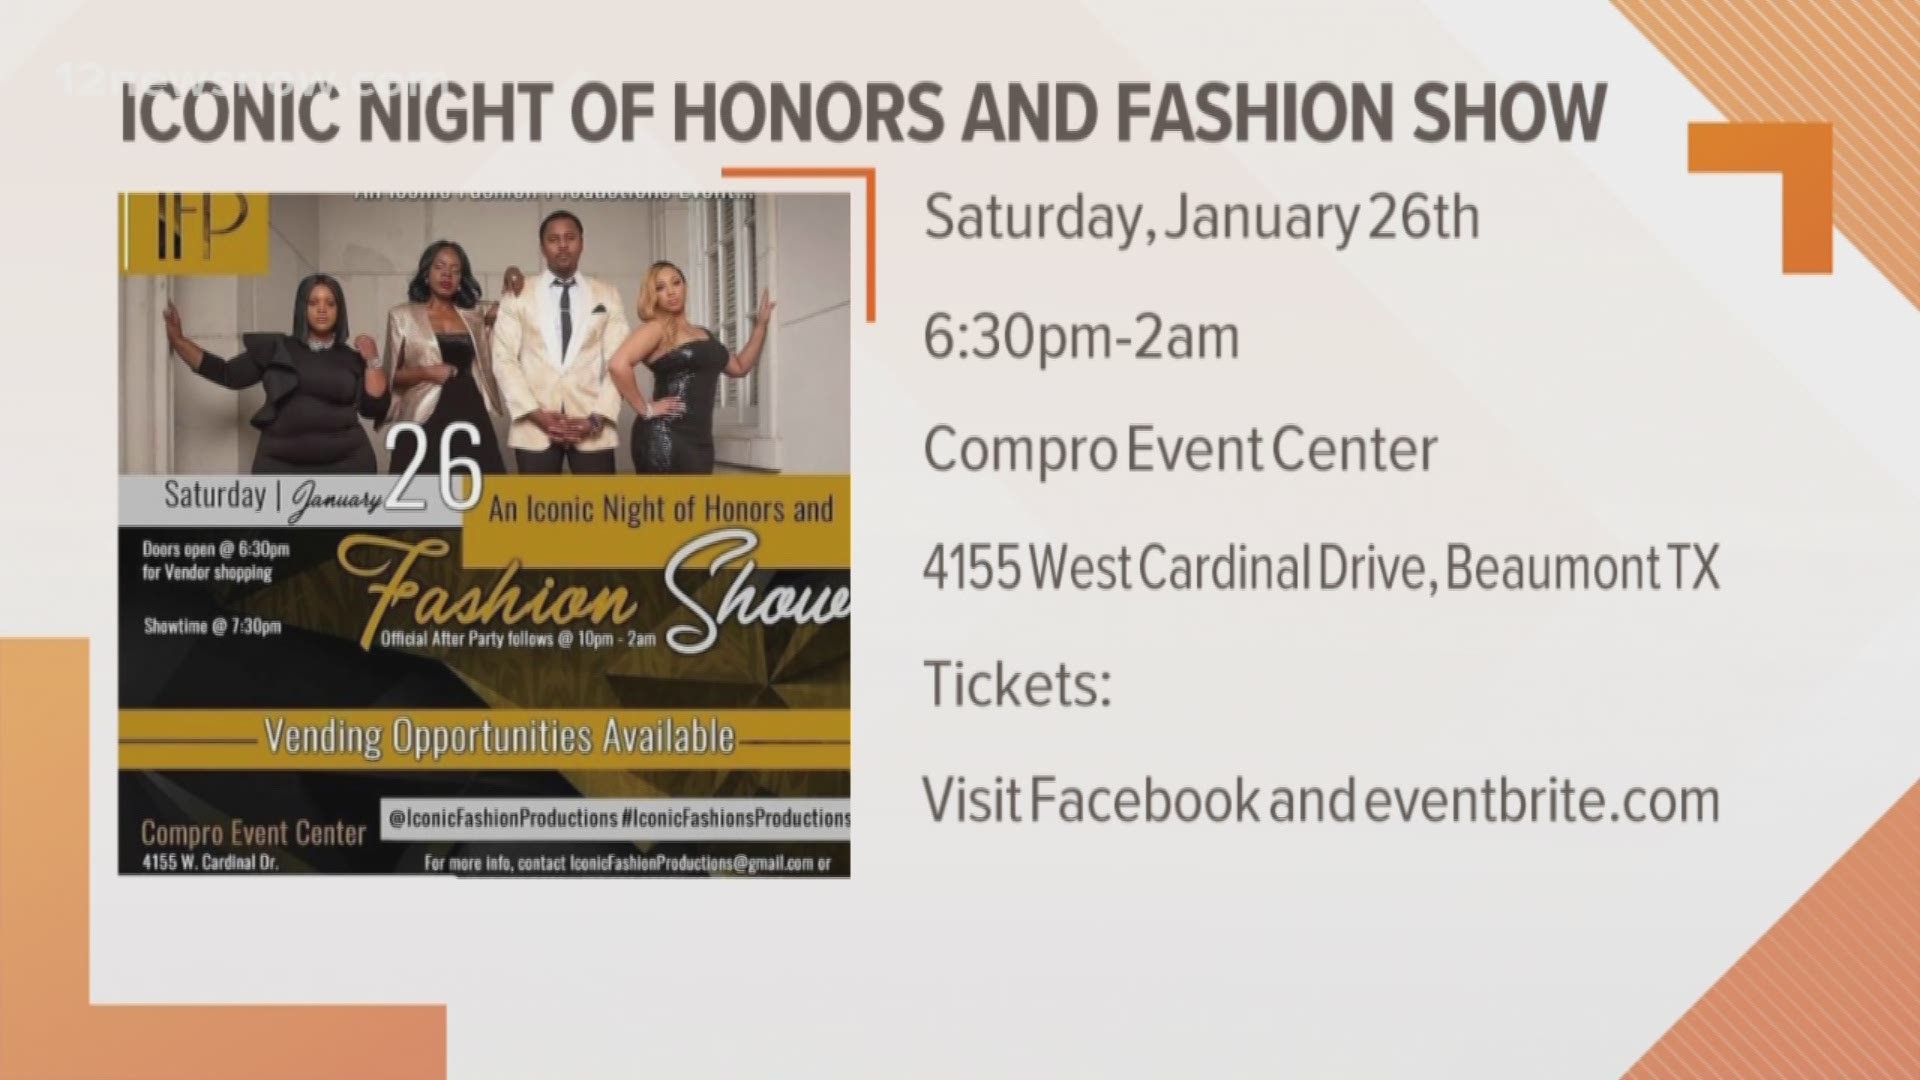 The show will have a special guest host, Irvin Randle, known on social media as "Mr. Steal Your Grandma", who went viral in 2016 with his own stylish photos. The event will be held Saturday, January 26th, from 6:30 PM until 2 AM at the Compro Event Center located at 4155 West Cardinal Drive here in Beaumont. For tickets, visit Facebook and Eventbrite.com.